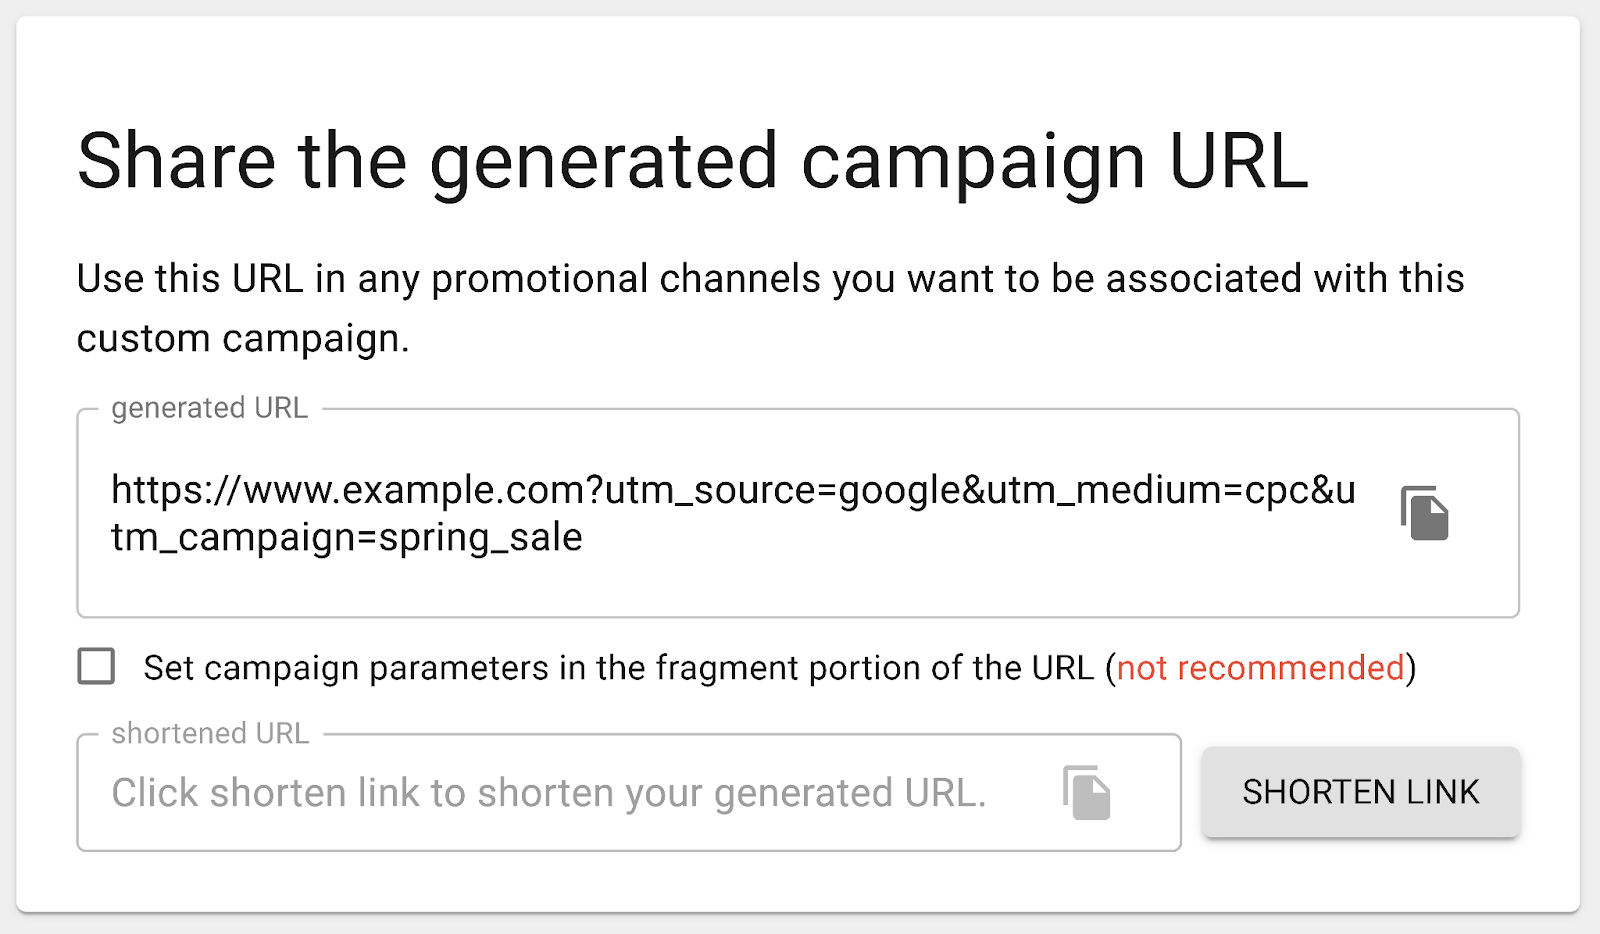 Share the generated campaign URL page